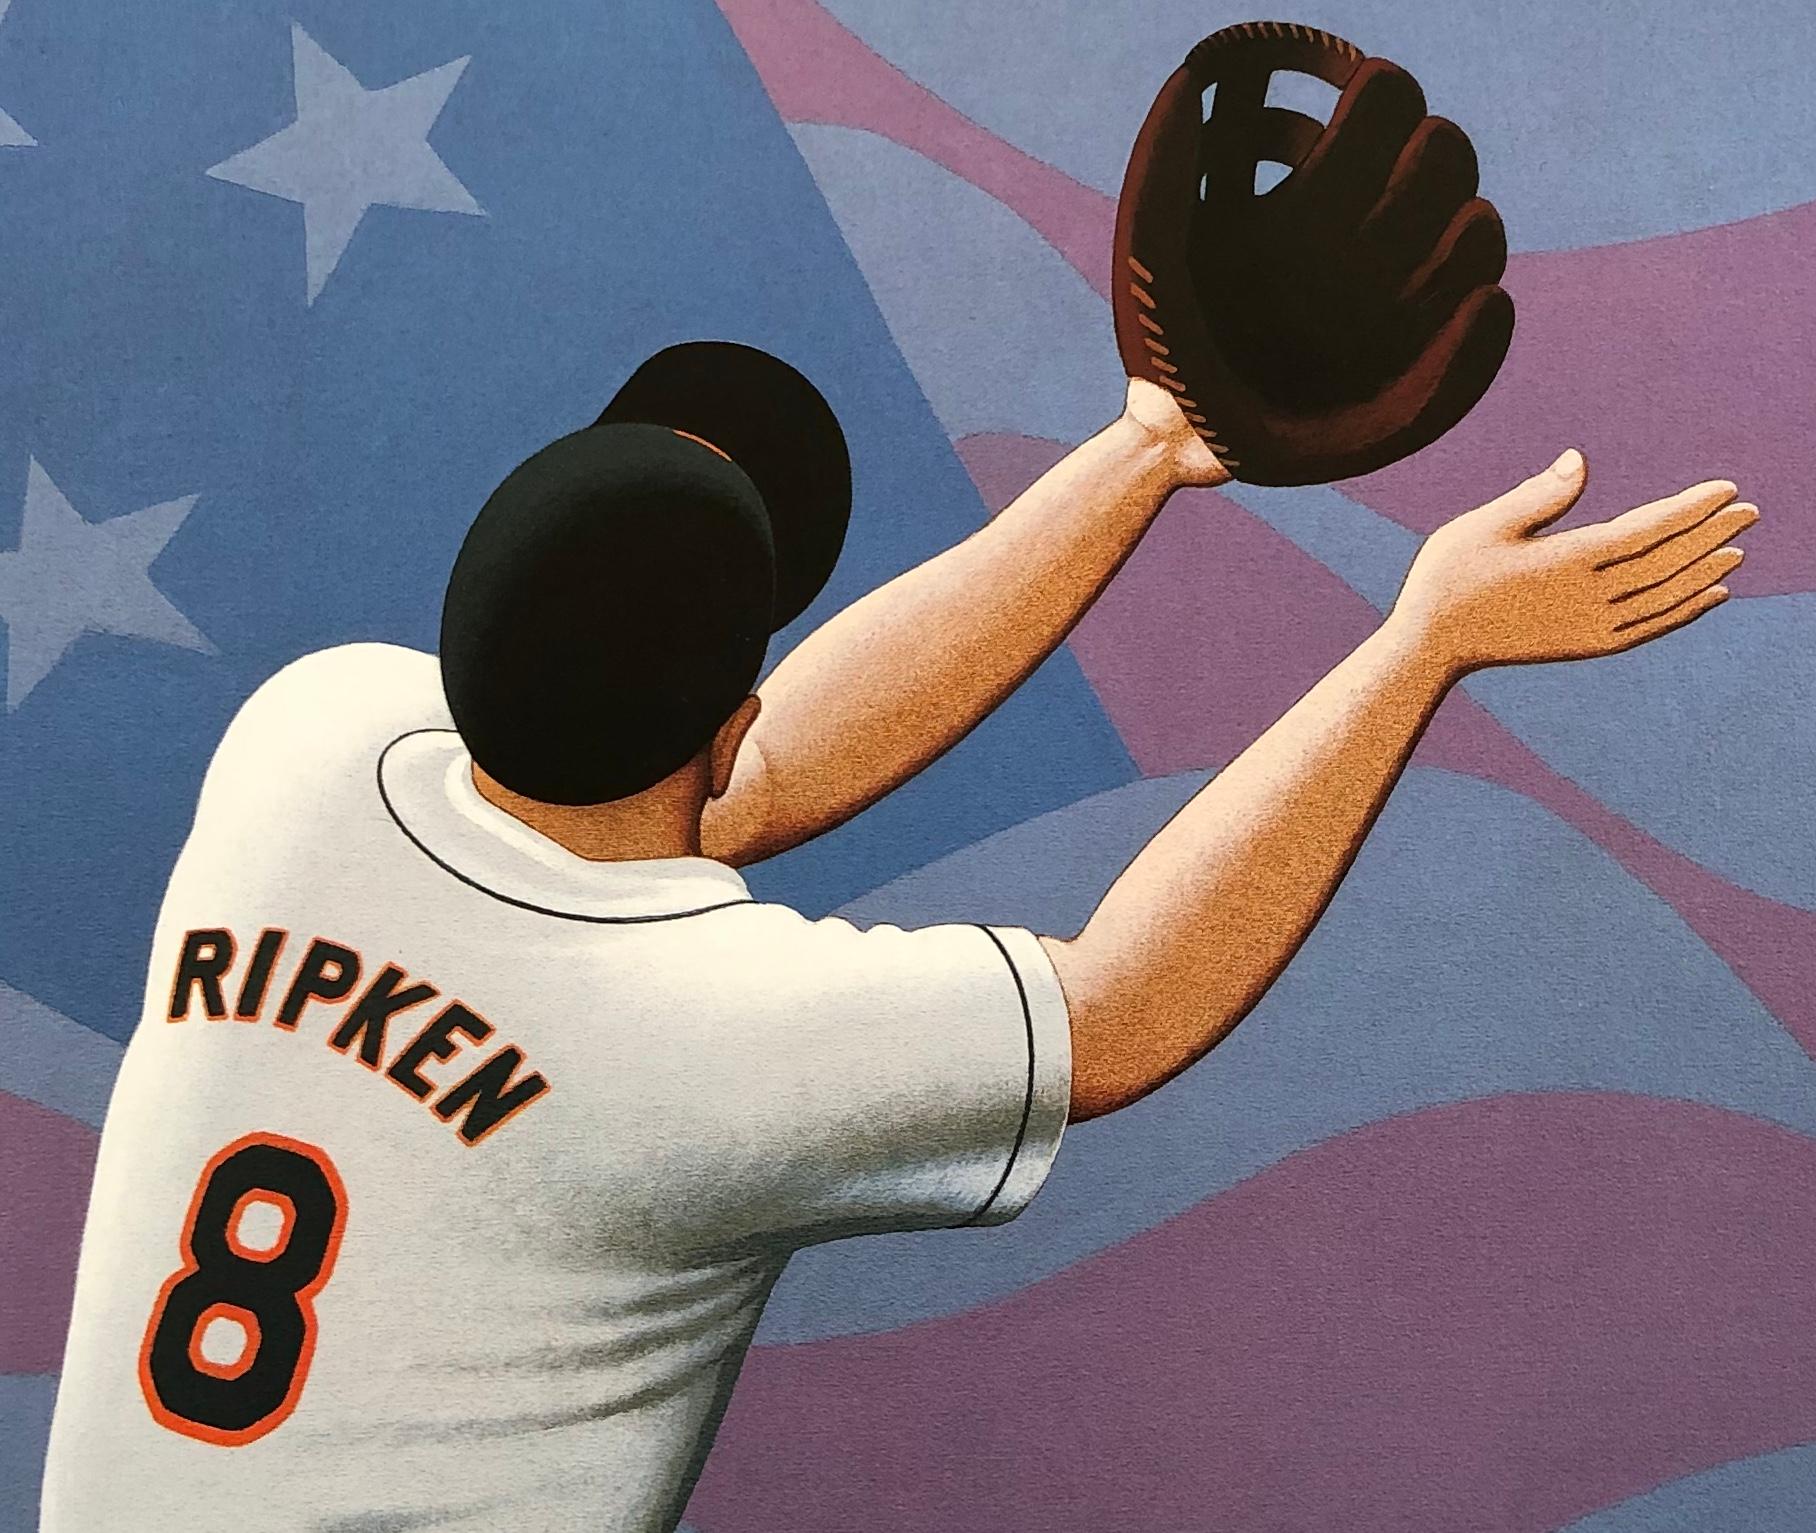 “IRON MAN” Cal Ripken 
Original painting by Lynn. Curlee
This painting was used as an illustration in 
Ballpark — The Story Of America’s Baseball Fields
Atheneum Books for Young Readers, 2005
Acrylic on stretched canvas, gallery wrapped with